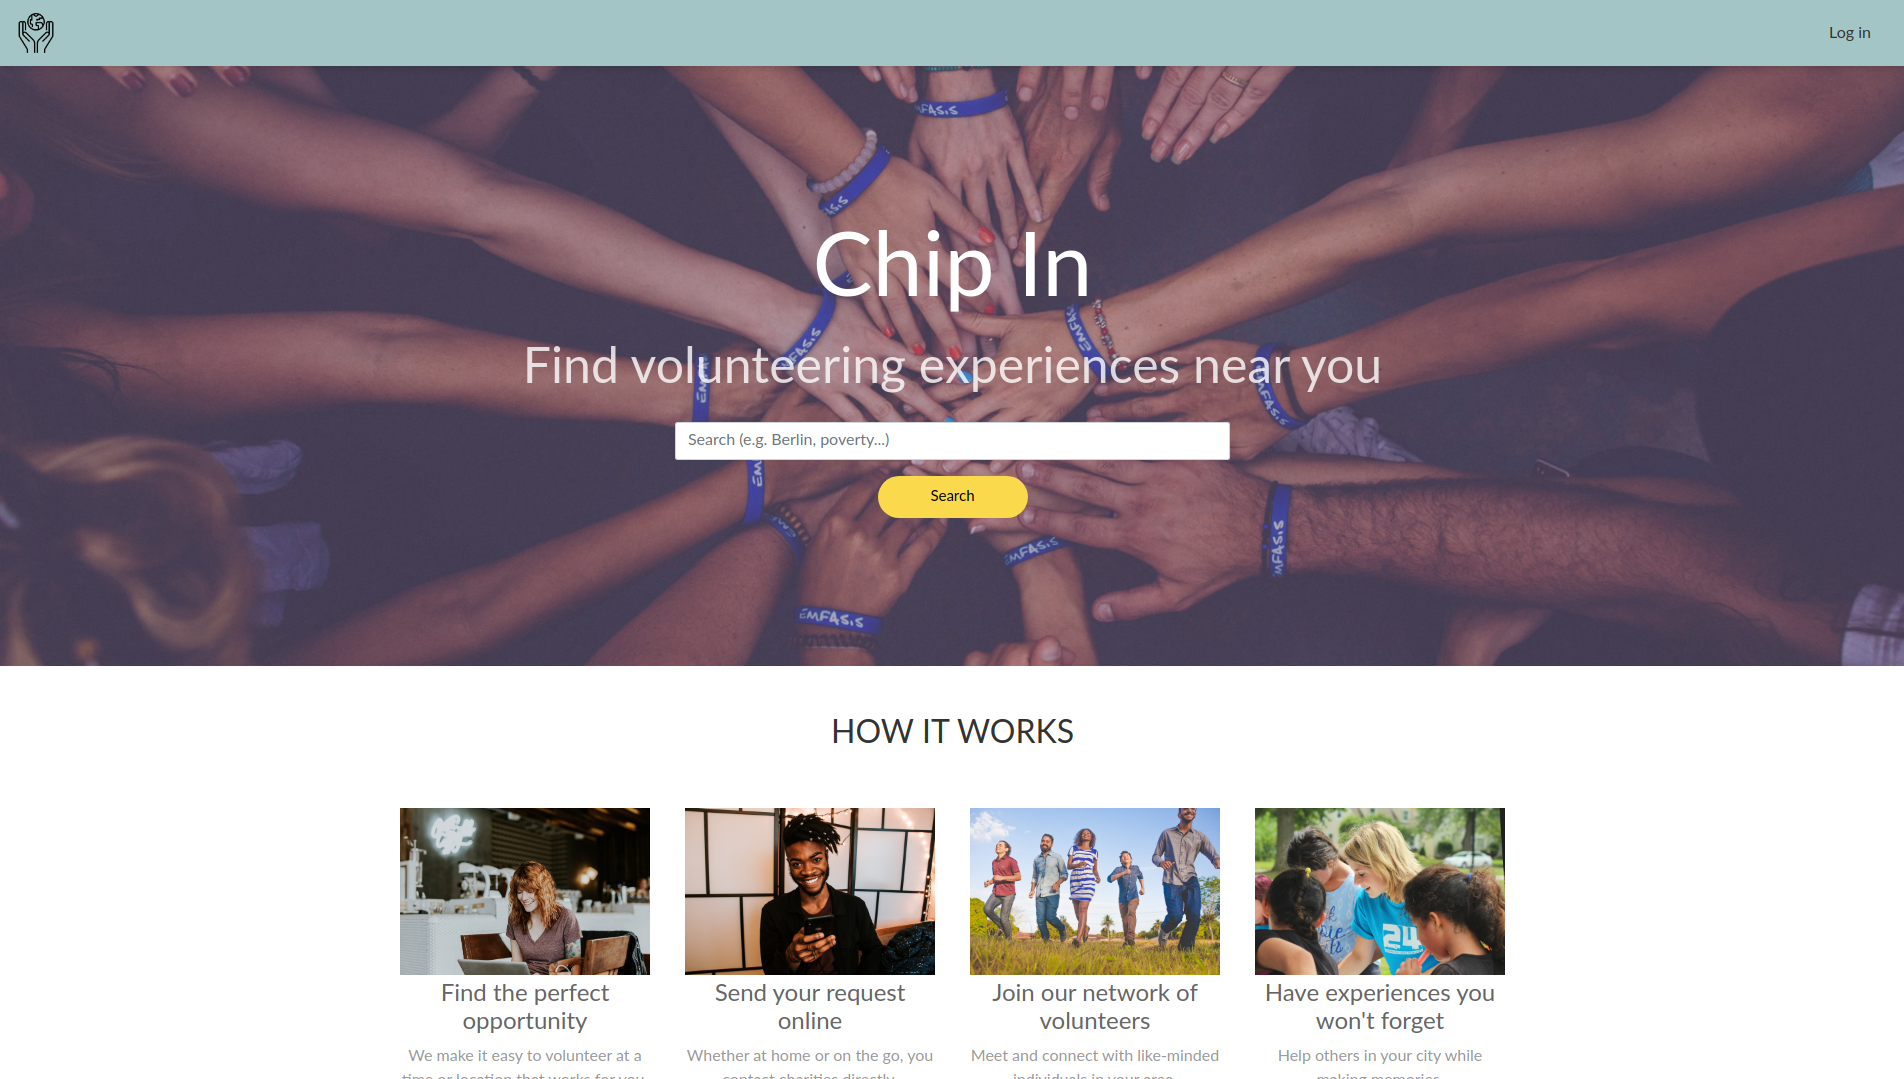 Preview of Chip-In, a community service platform built by a team of developers including Benjamin Chavez at Le Wagon's full stack coding bootcamp.